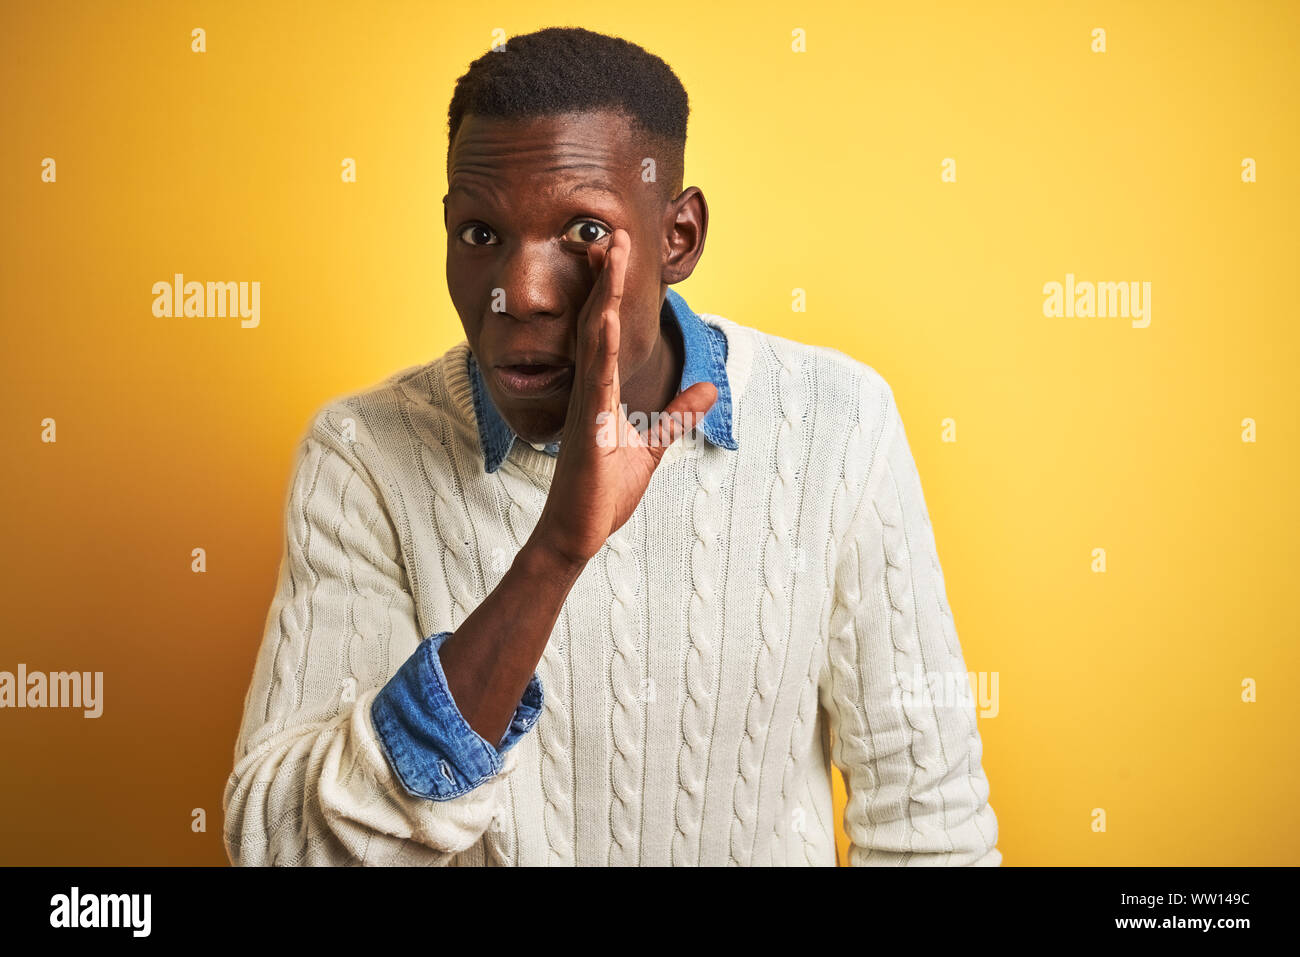 African American Man Wearing Denim Shirt And White Sweater Over Isolated Yellow Background Hand